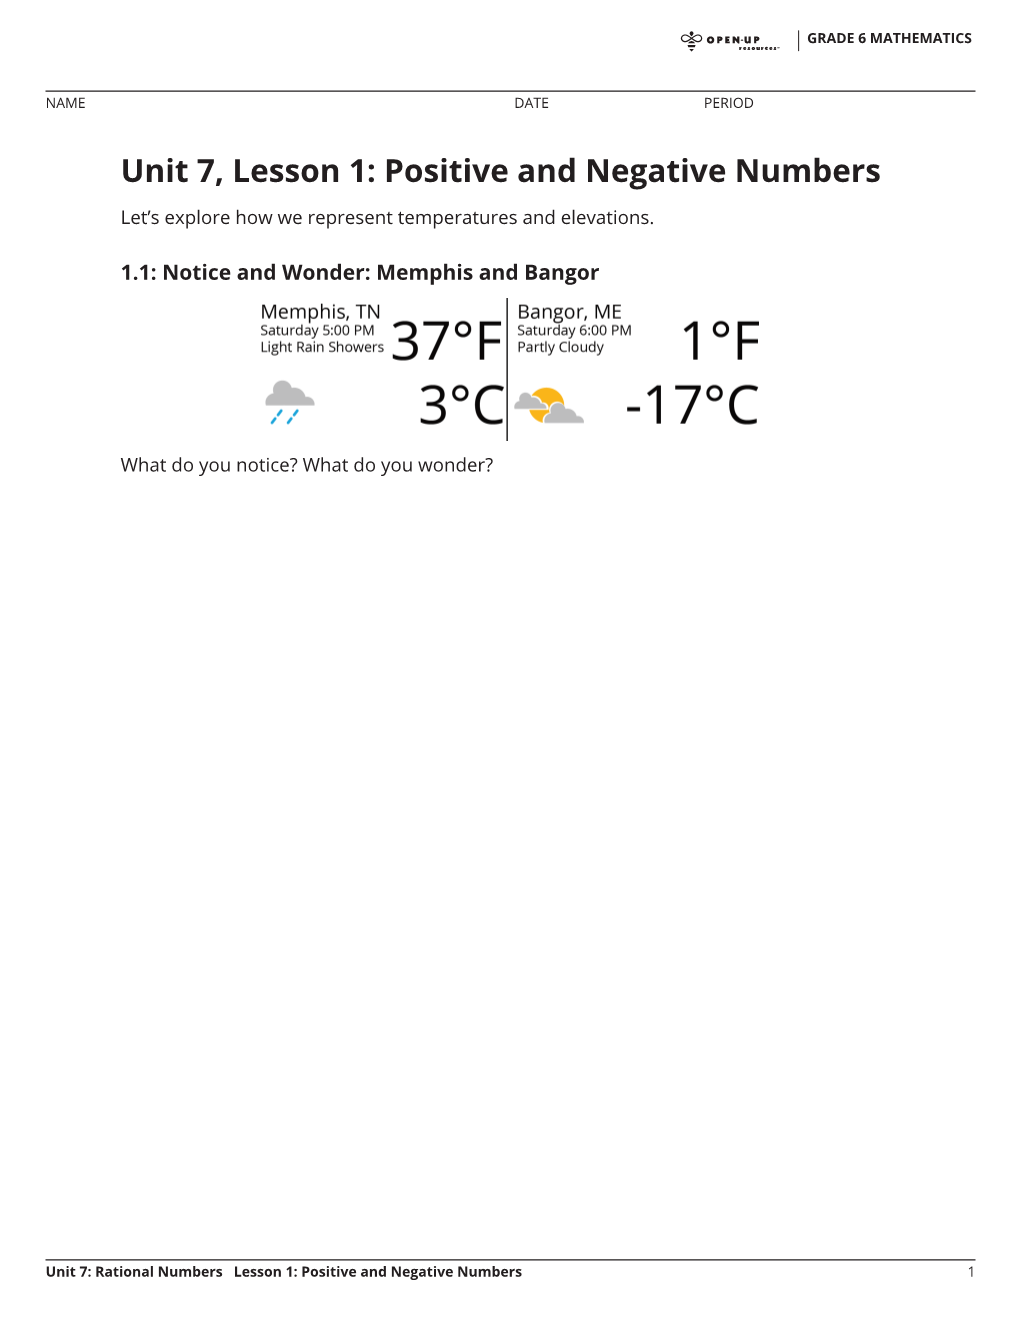 Unit 7, Lesson 1: Positive and Negative Numbers